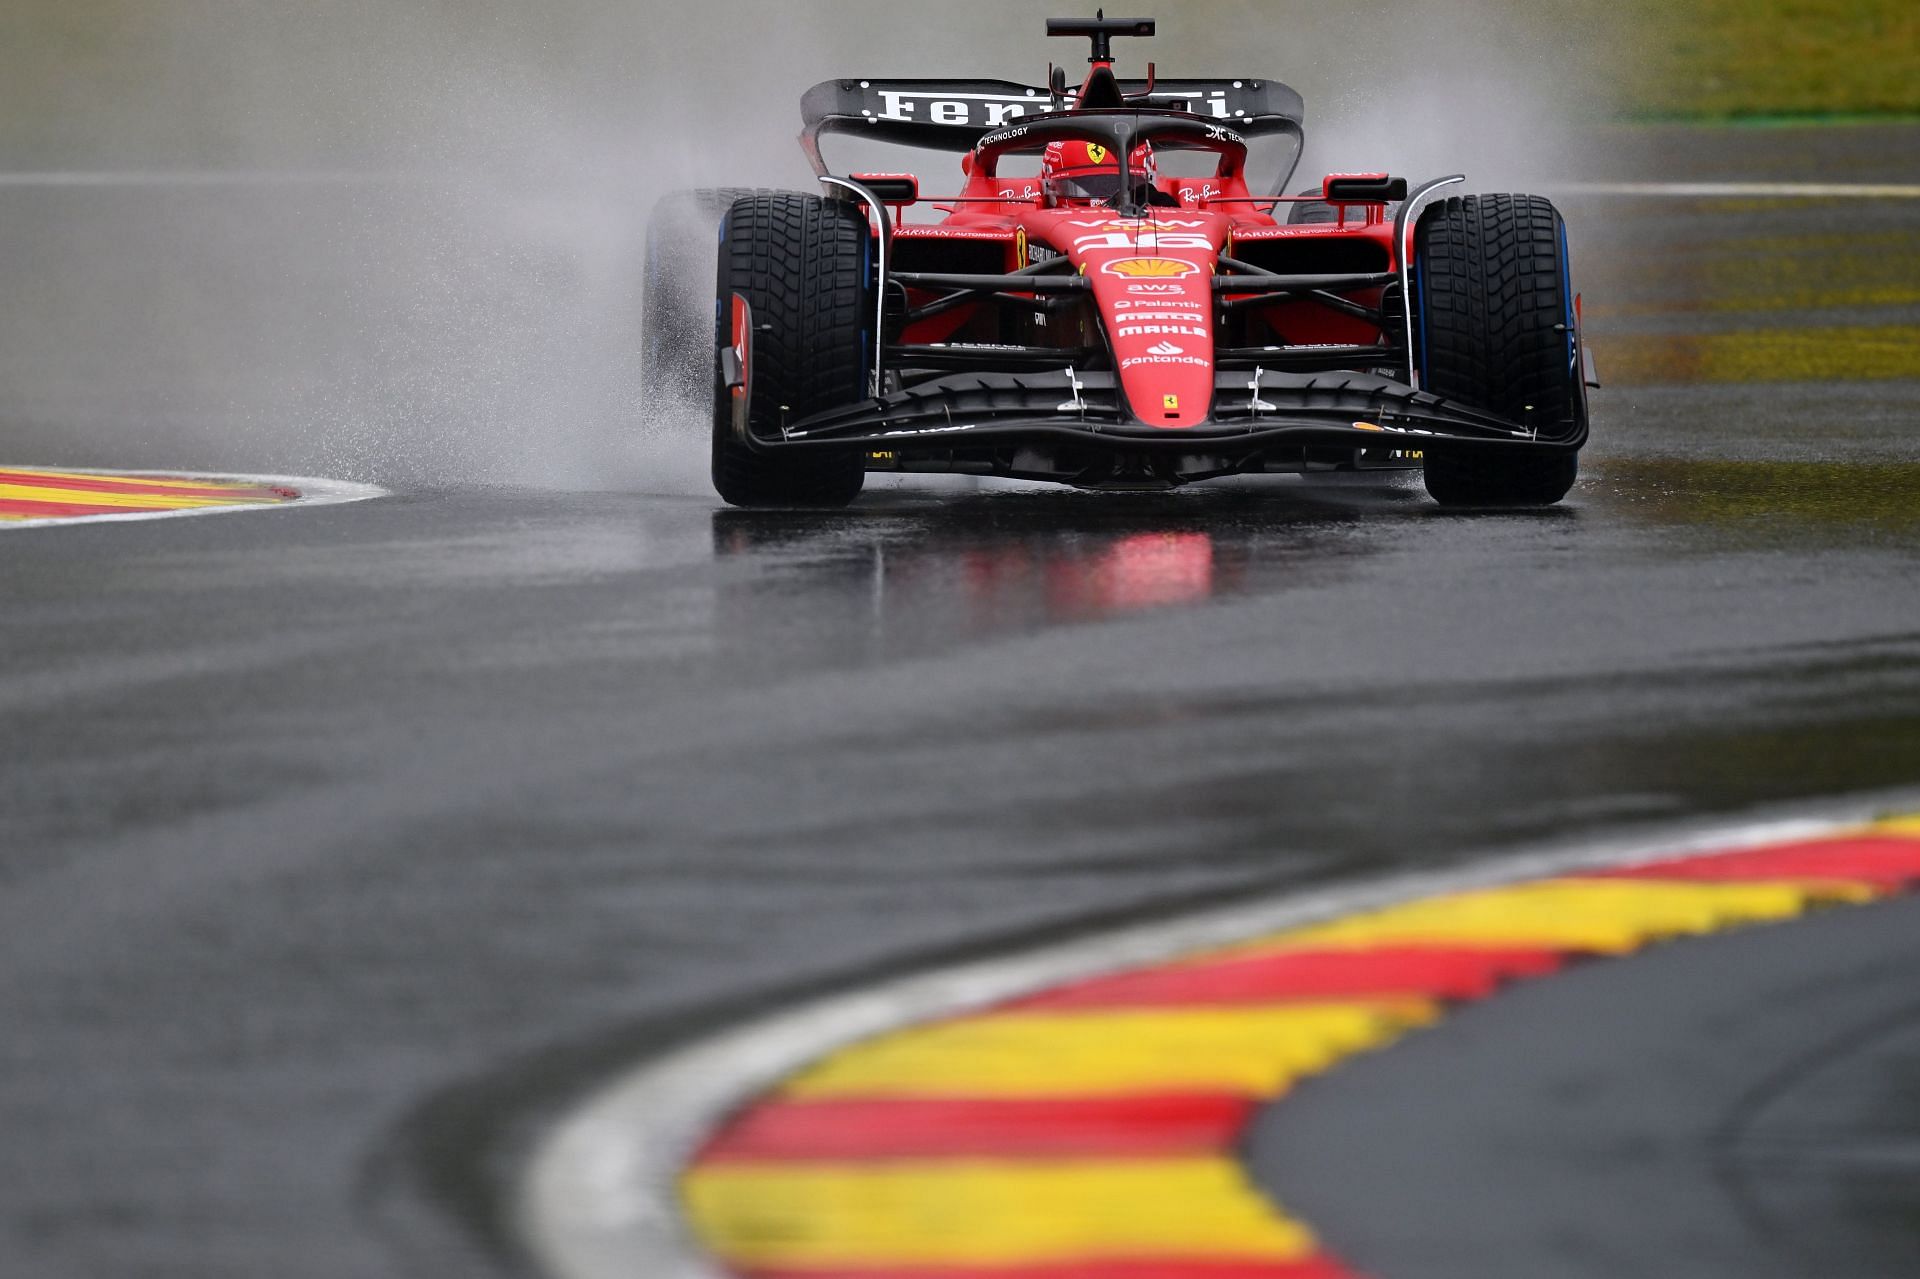 Charles Leclerc in the Qualifying session